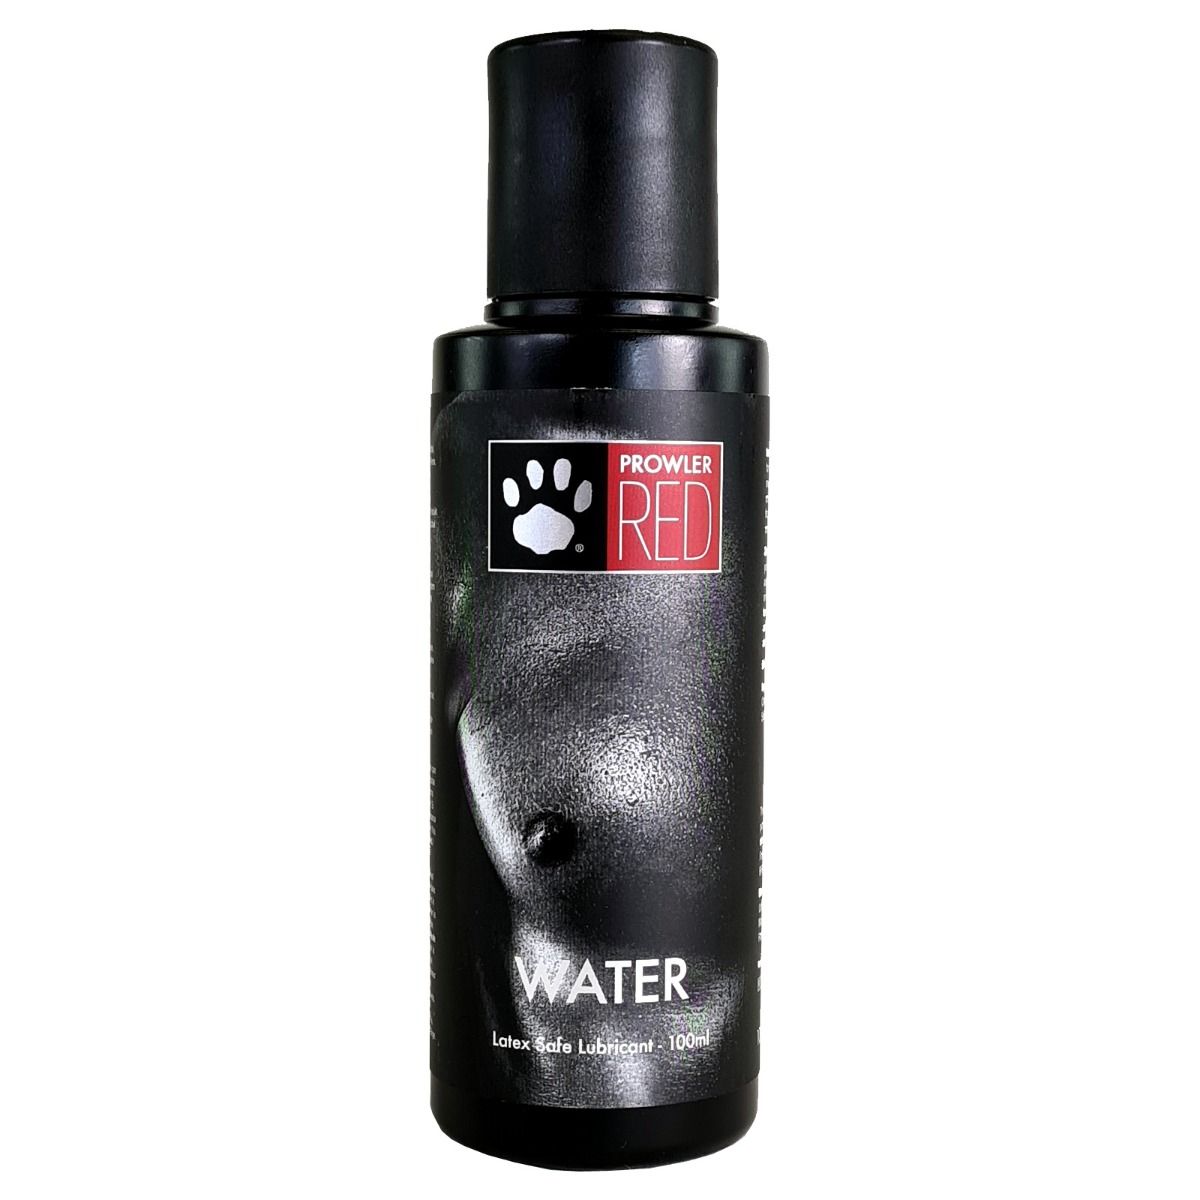 Prowler RED Water Based Lube 100ml